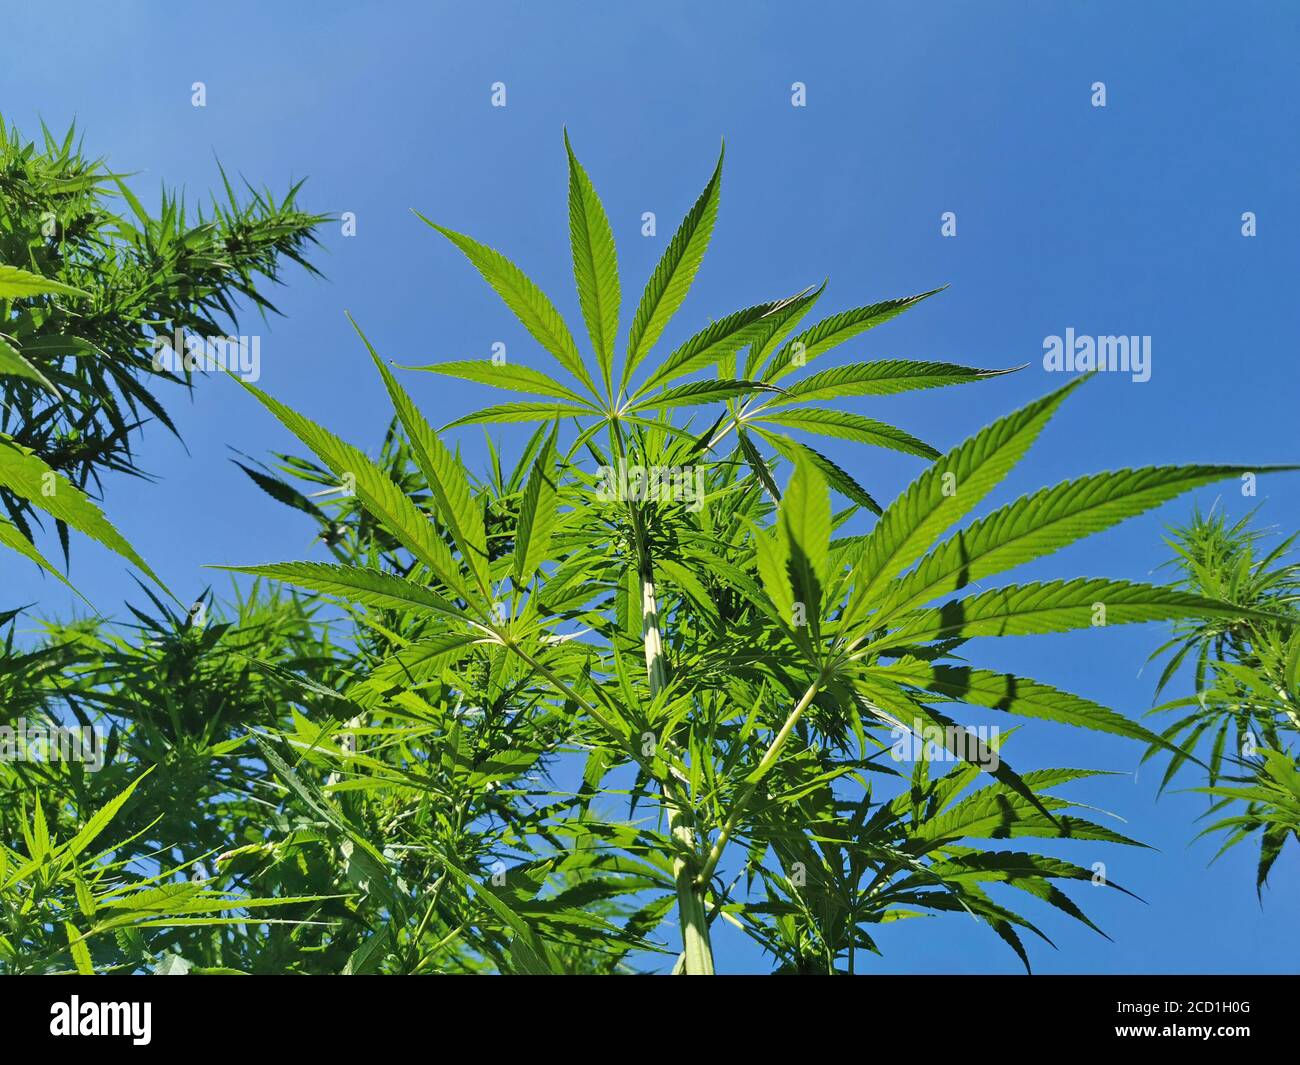 low angle view of hemp plants in front of a clear blue sky, background with copy space Stock Photo